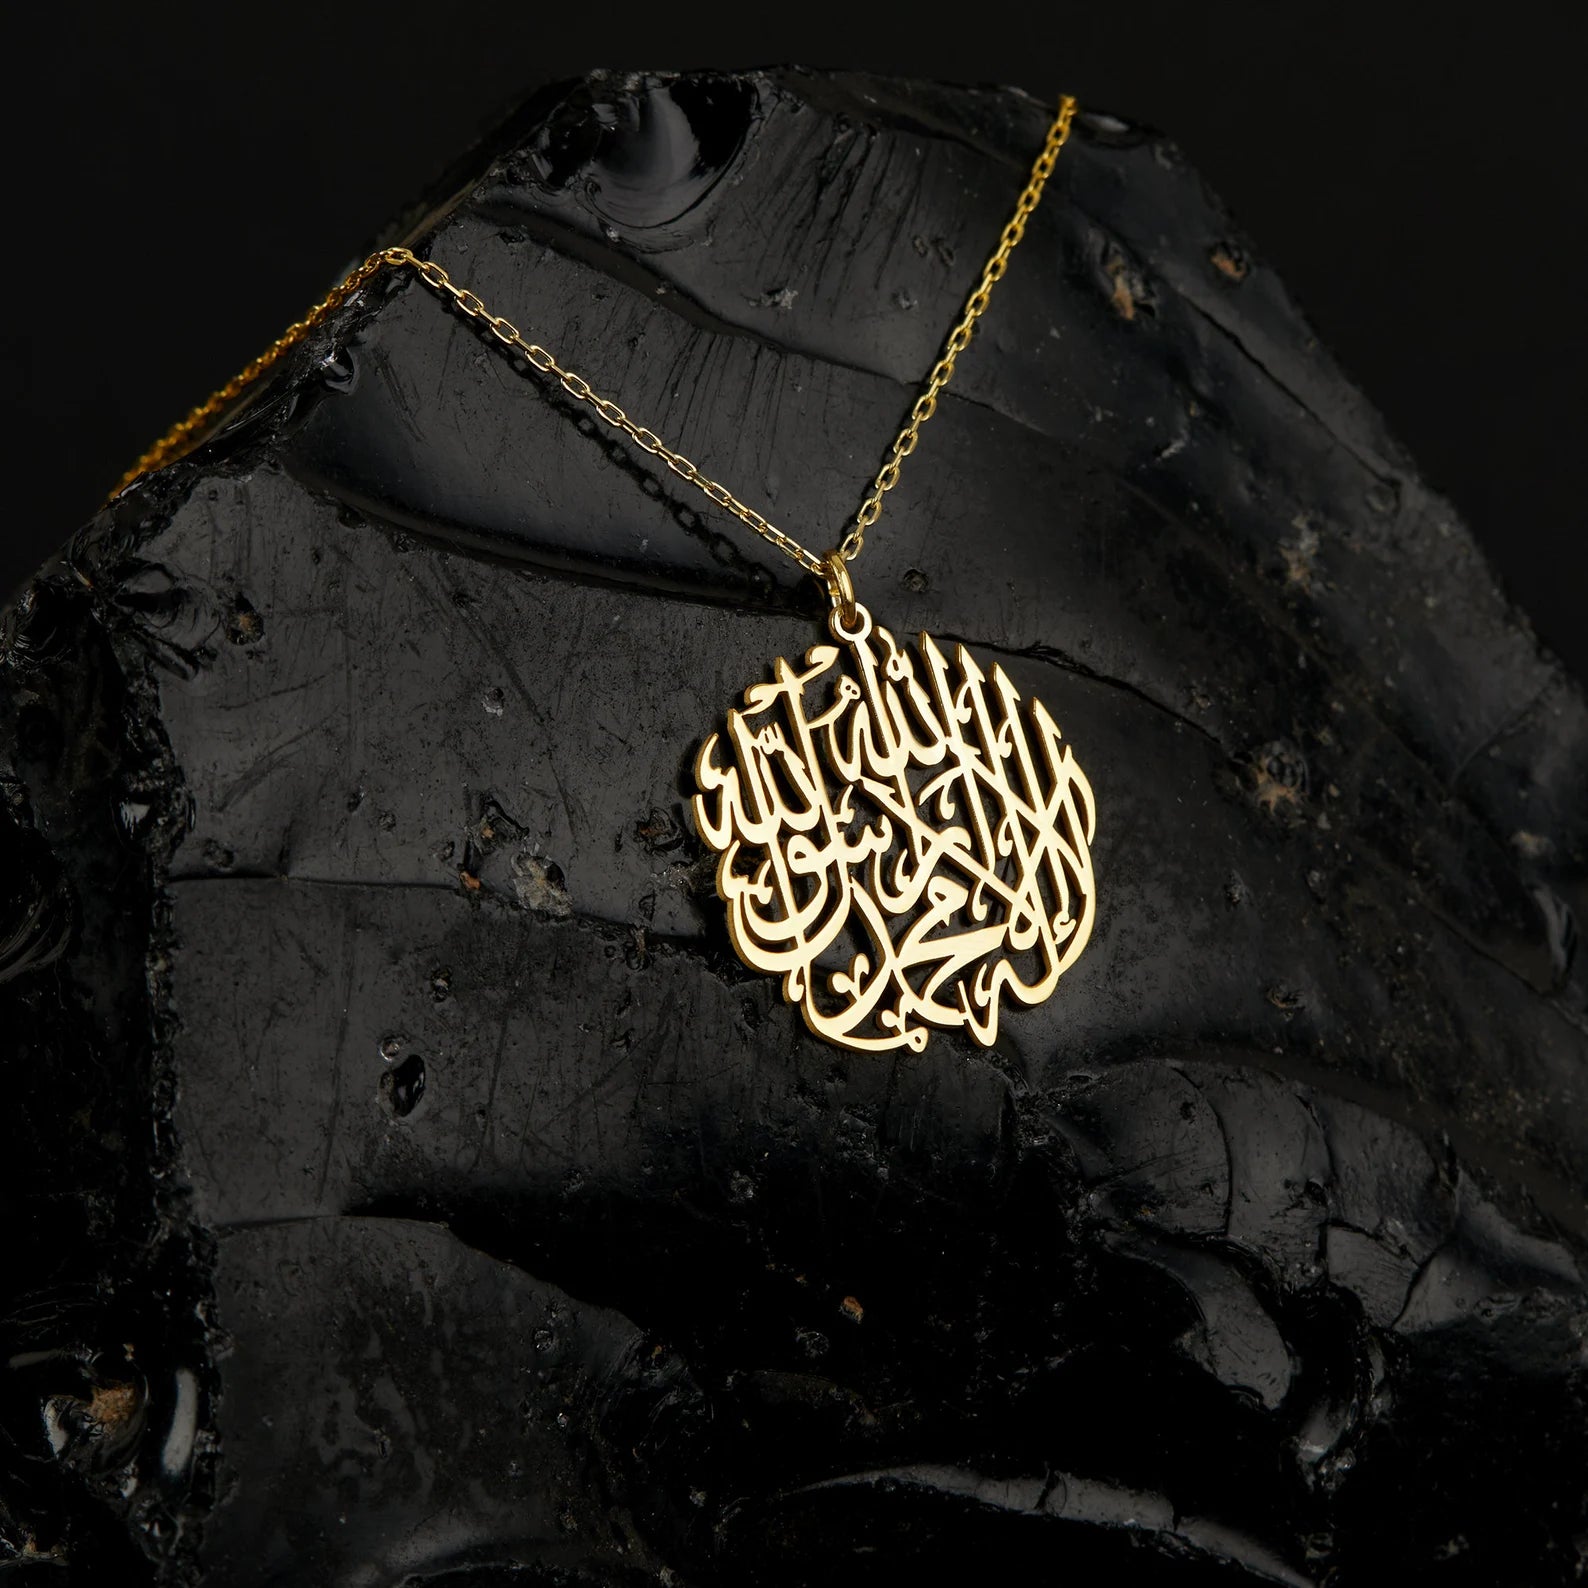 Arabian Islamic calligraphy pendant made in real gold. Designed and handcrafted in the UAE. This authentic pendant is locally handcrafted with the highest quality materials and artisans available in Dubai.